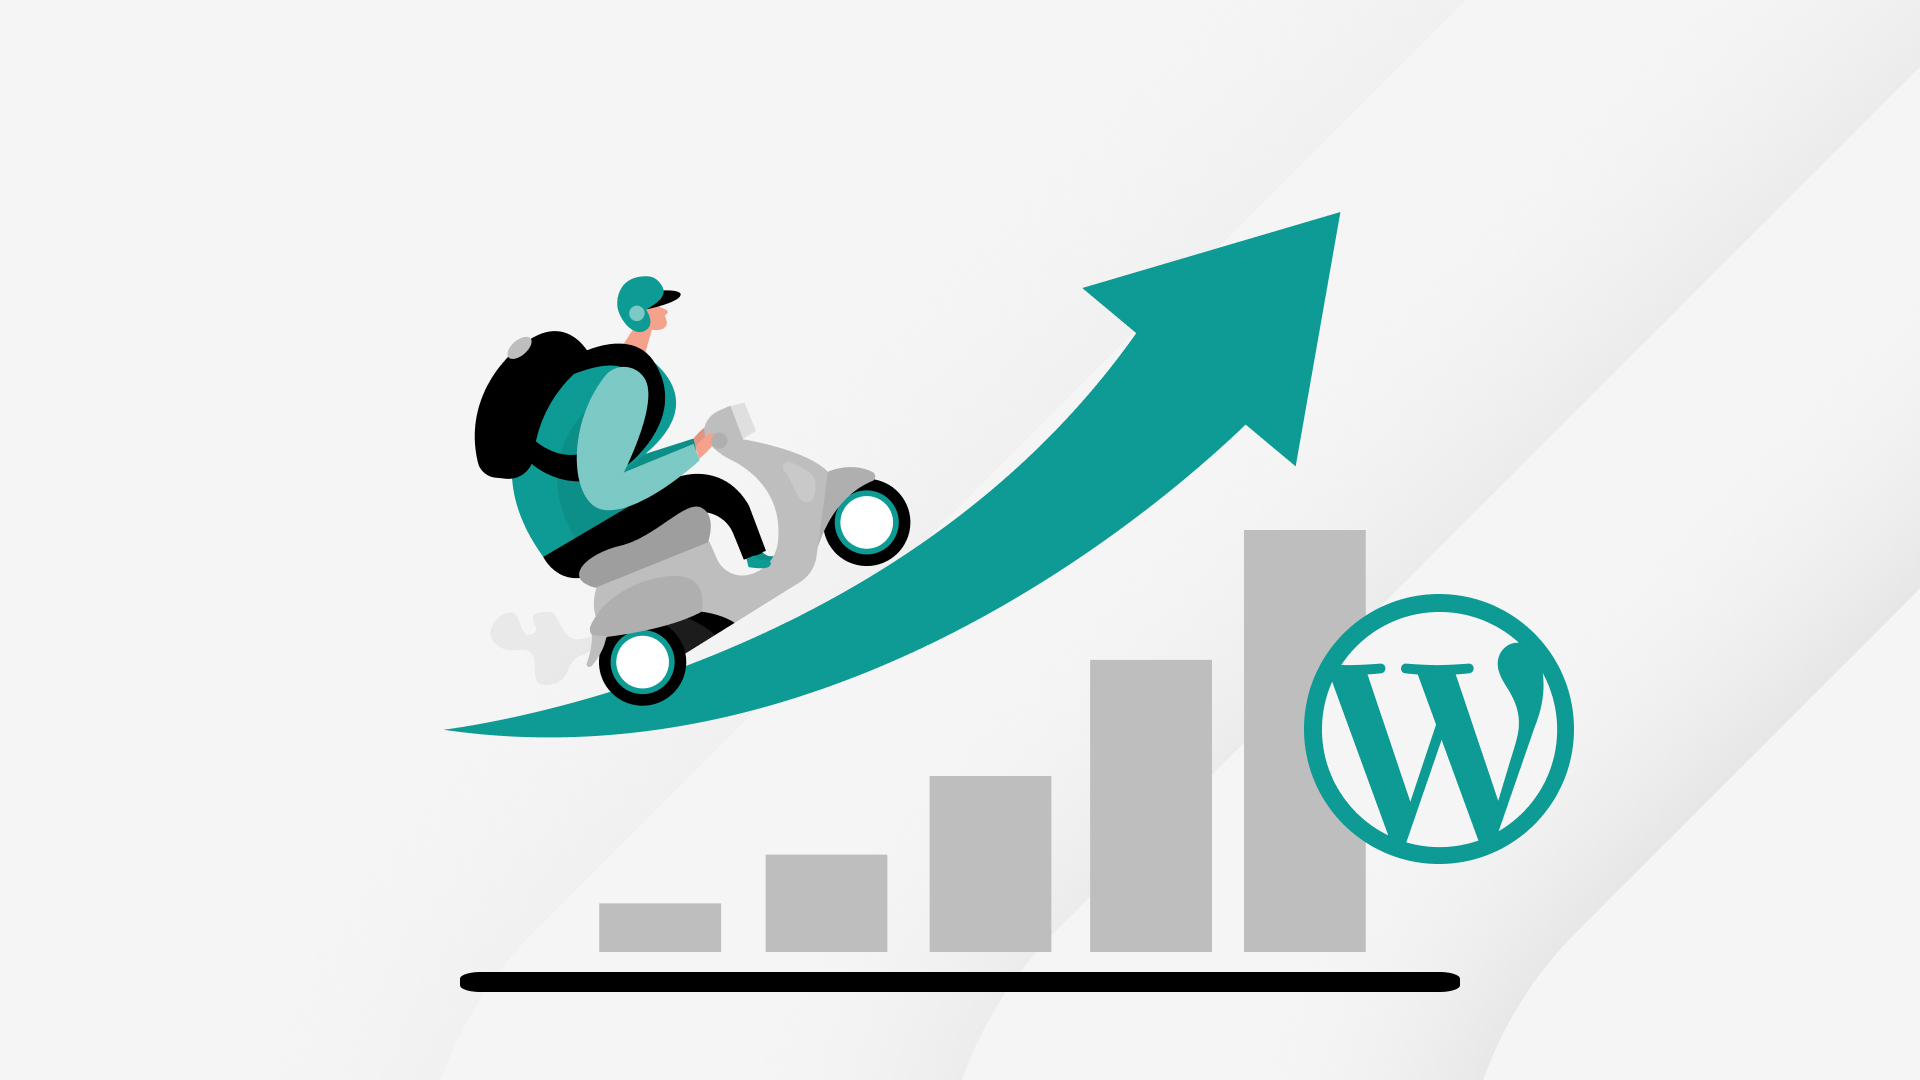 Illustration of a person on a scooter, riding on a curve going up with the WordPress logo at the base.